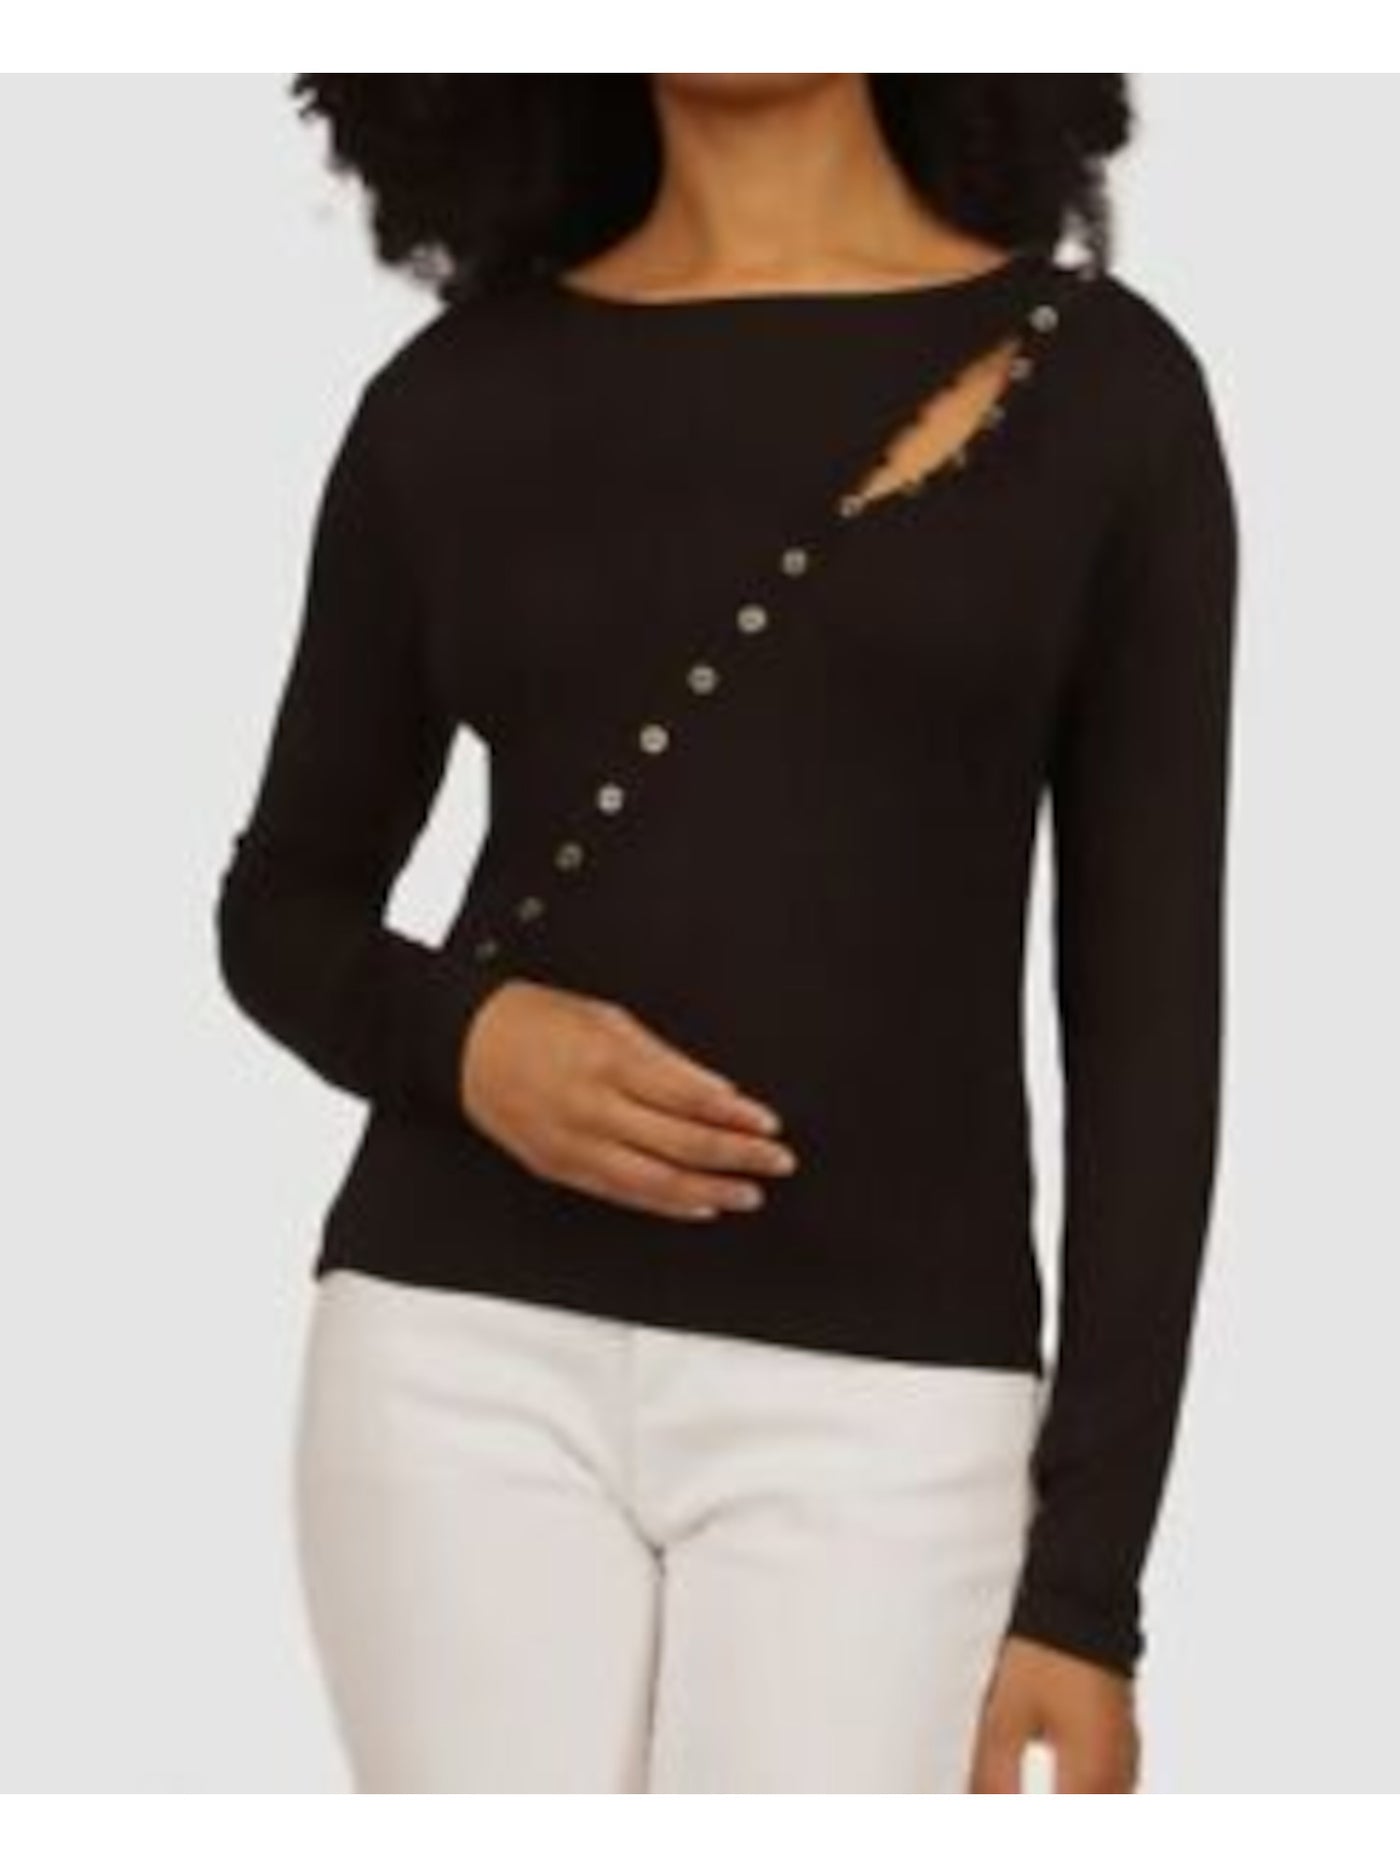 MICHAEL MICHAEL KORS Womens Black Fitted Asymmetrical Button Front Long Sleeve Boat Neck Top XL